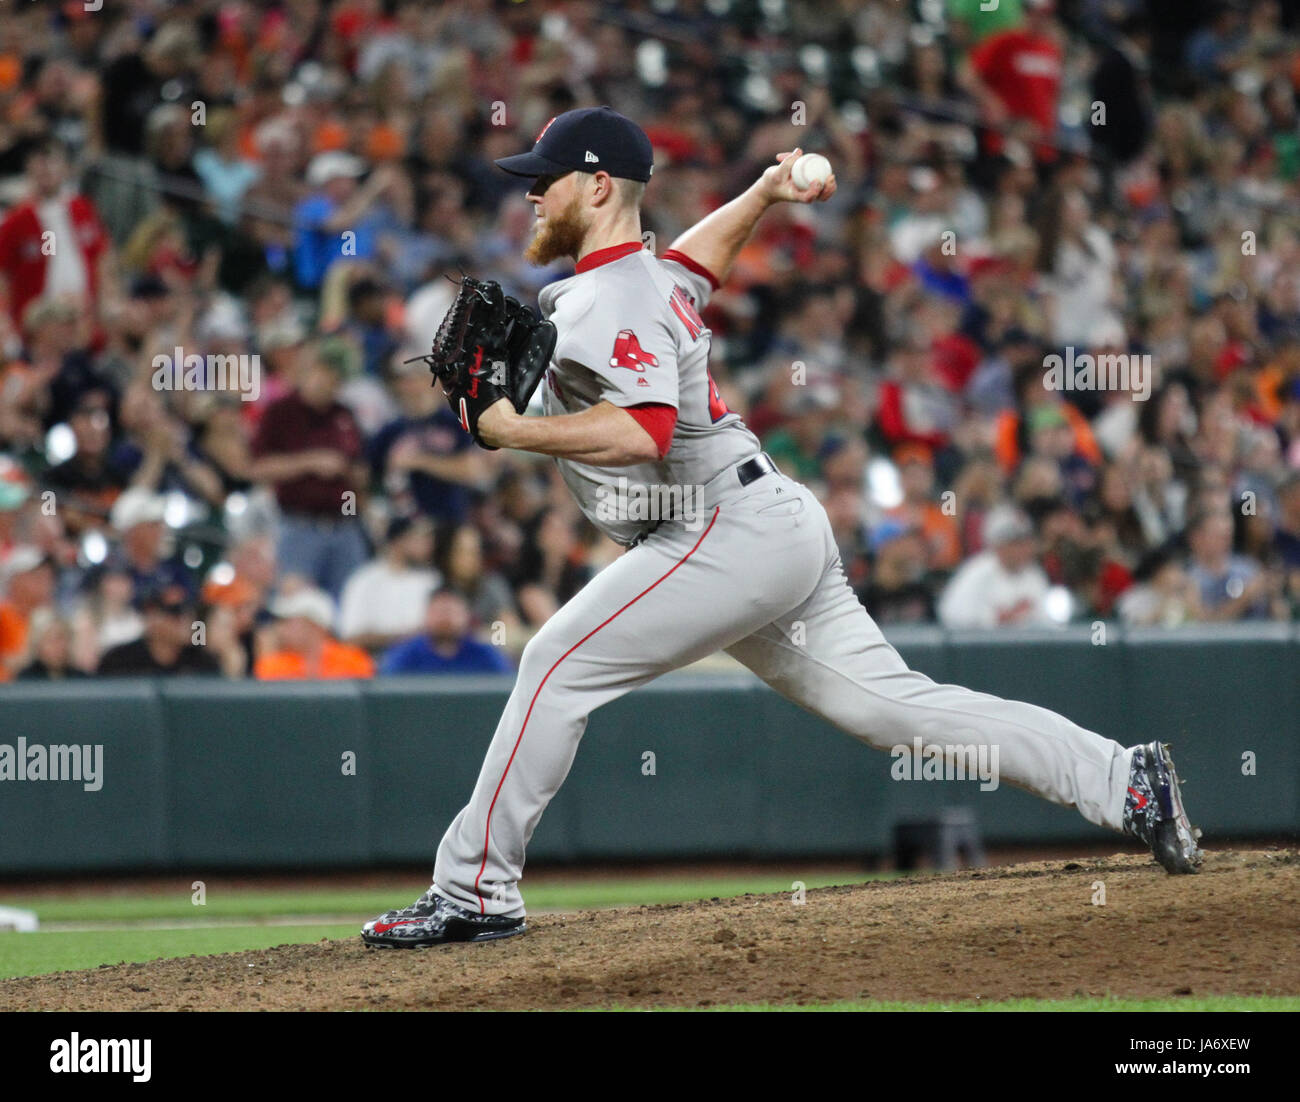 Mlb. 3rd June, 2017. Boston Red Sox relief pitcher Craig Kimbrel (46)  pitches during the Boston Red Sox vs Baltimore Orioles game at Orioles Park  in Camden Yards in Baltimore, MD. Boston